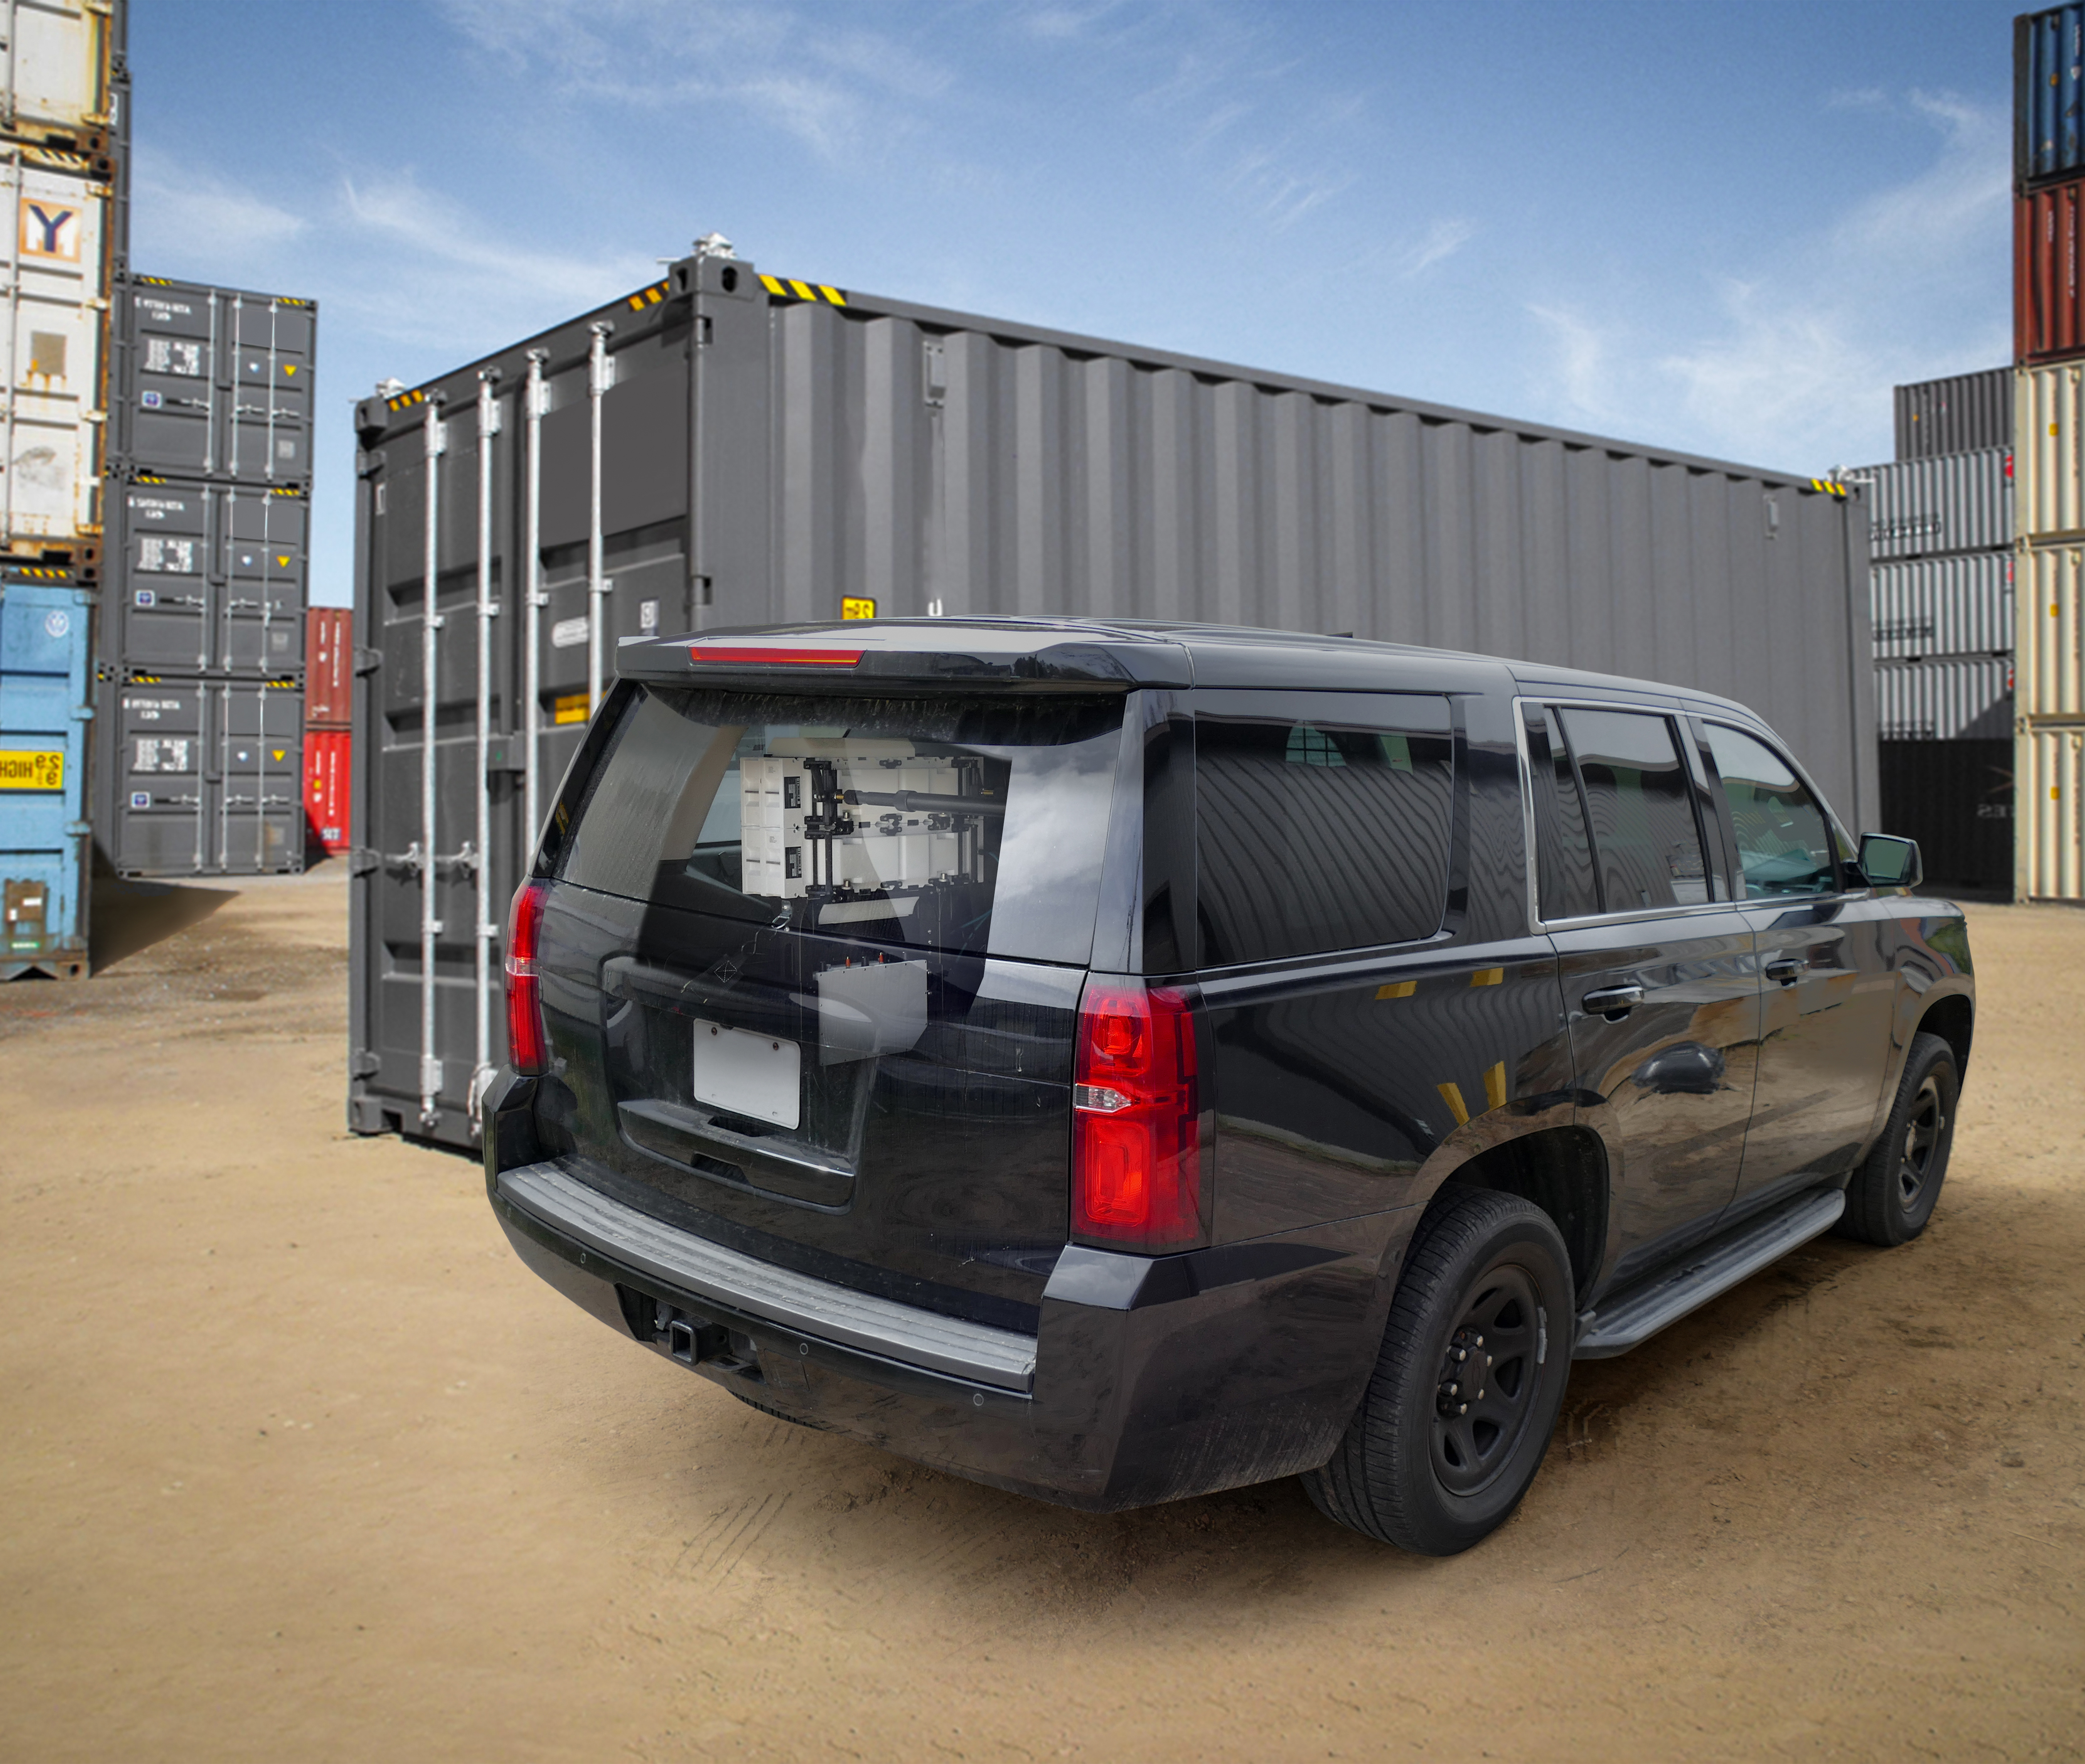 SUV parked near a sea container with the FlexSpec x8400 system visible from the window and trunk